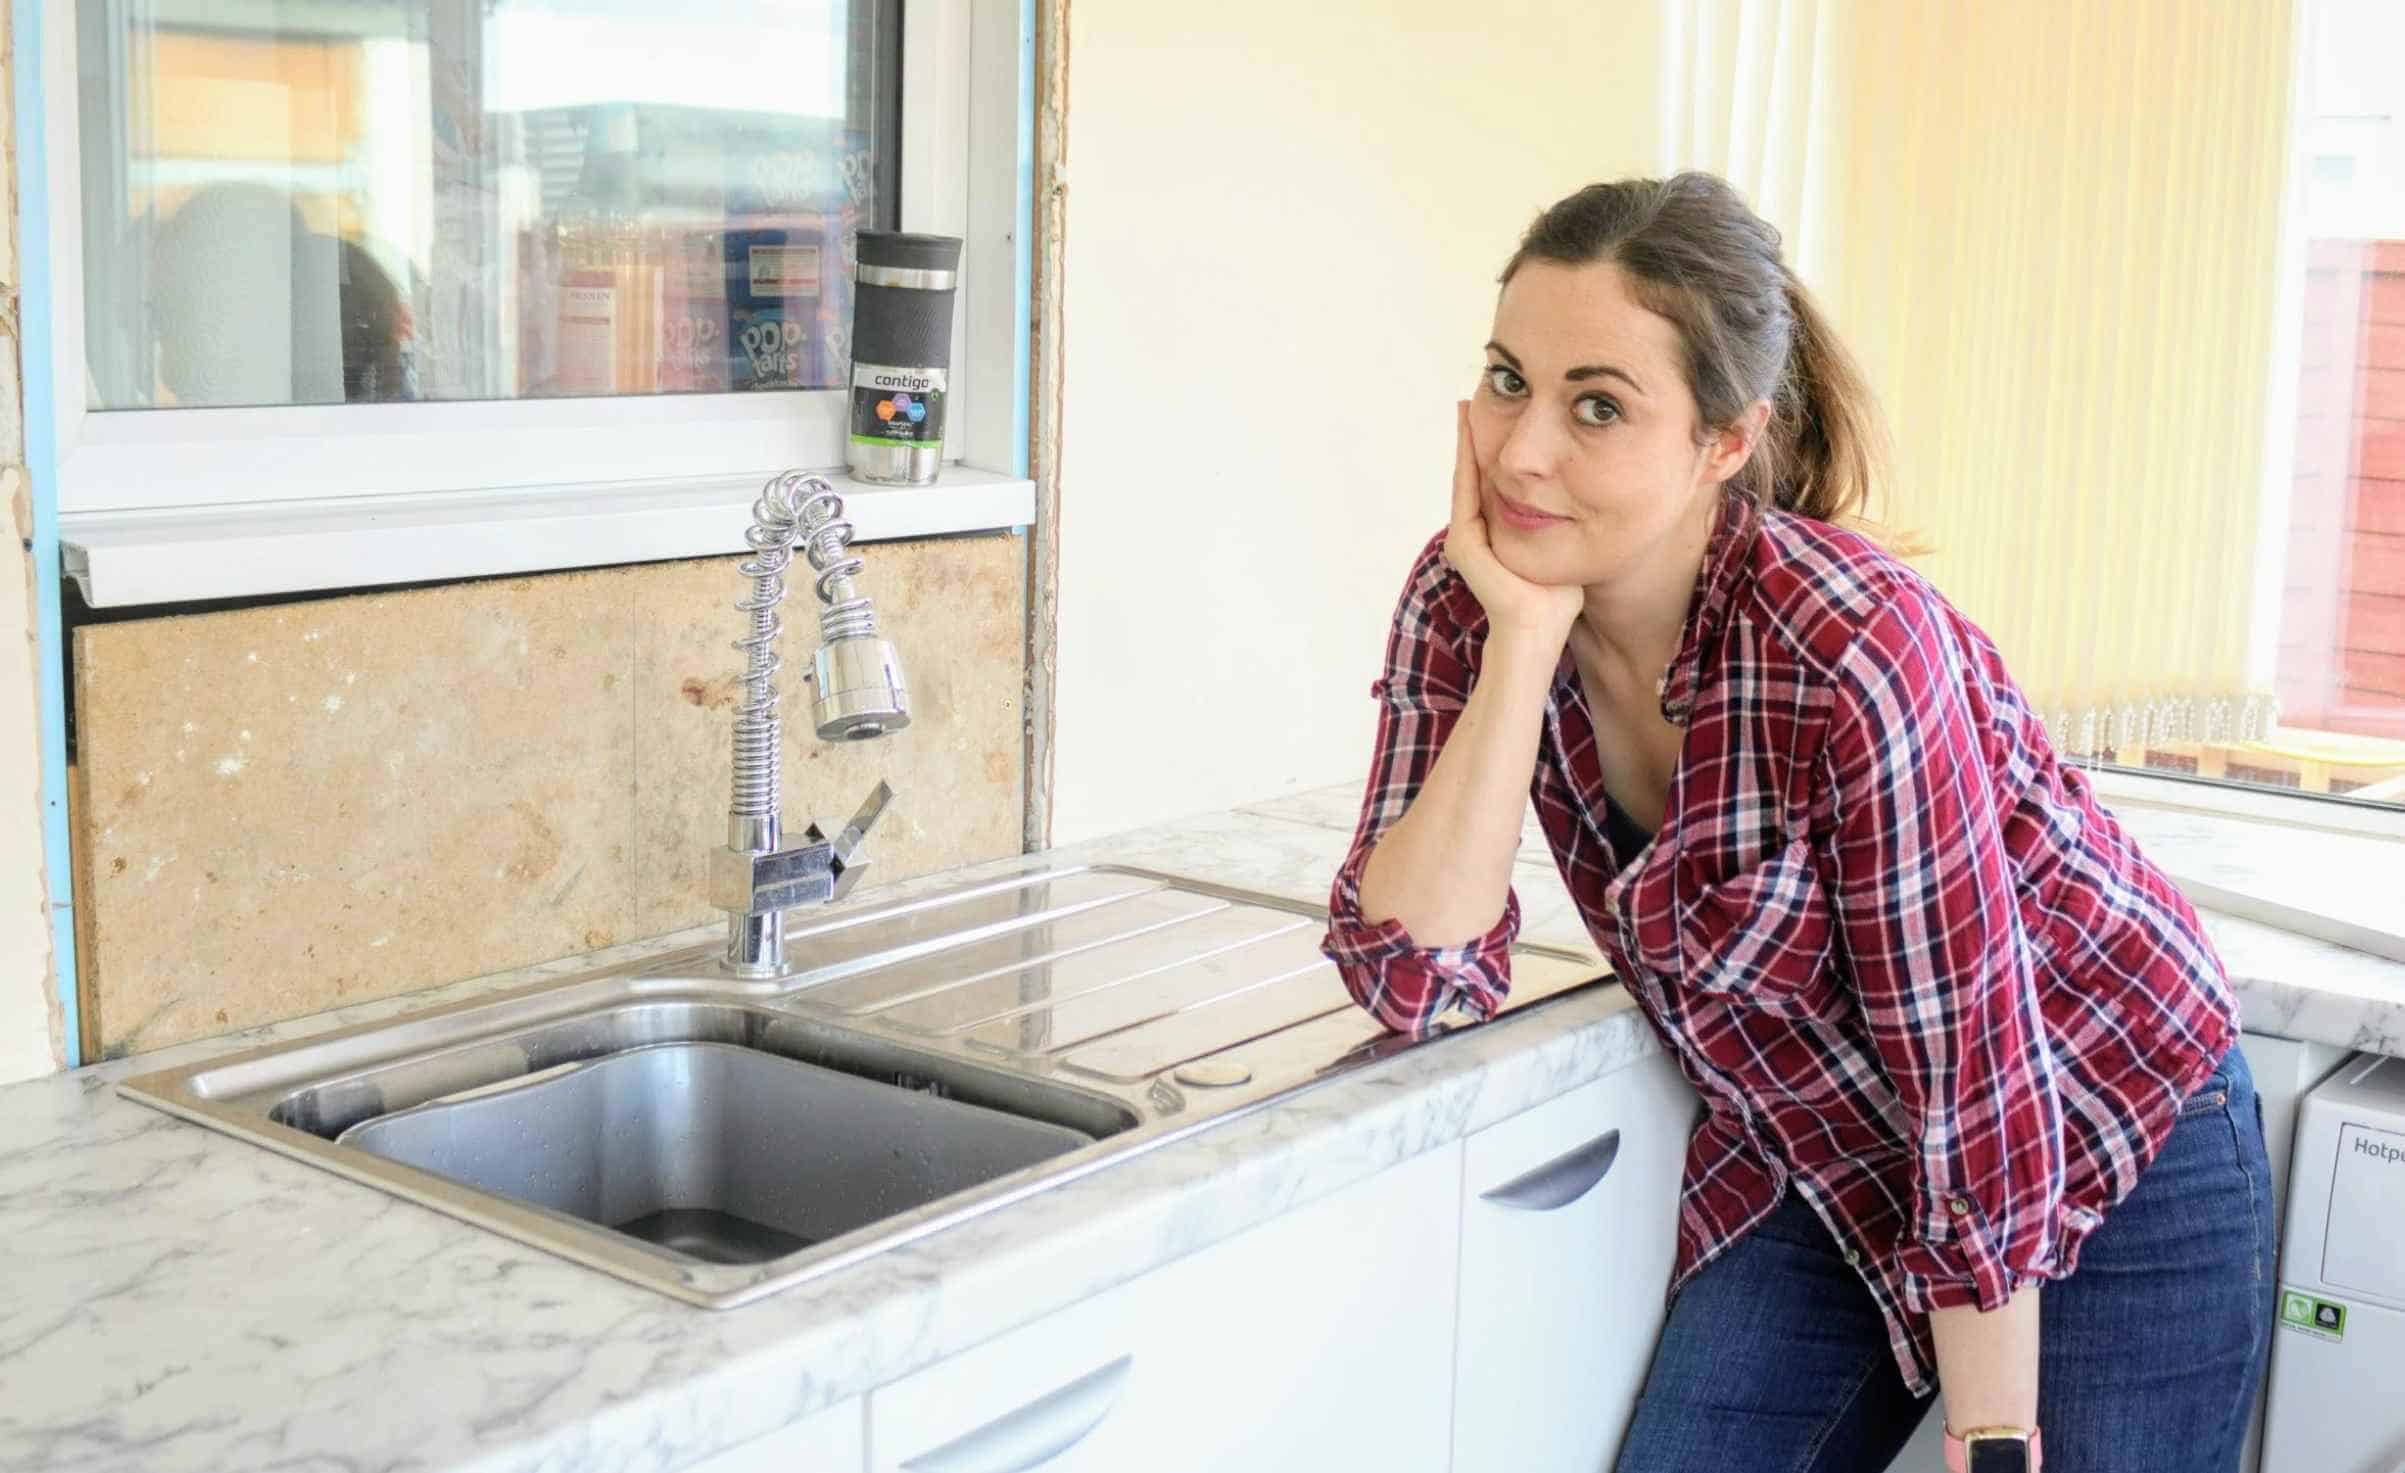 Why Does My Kitchen Sink Smell? [Causes+Solutions] Explained